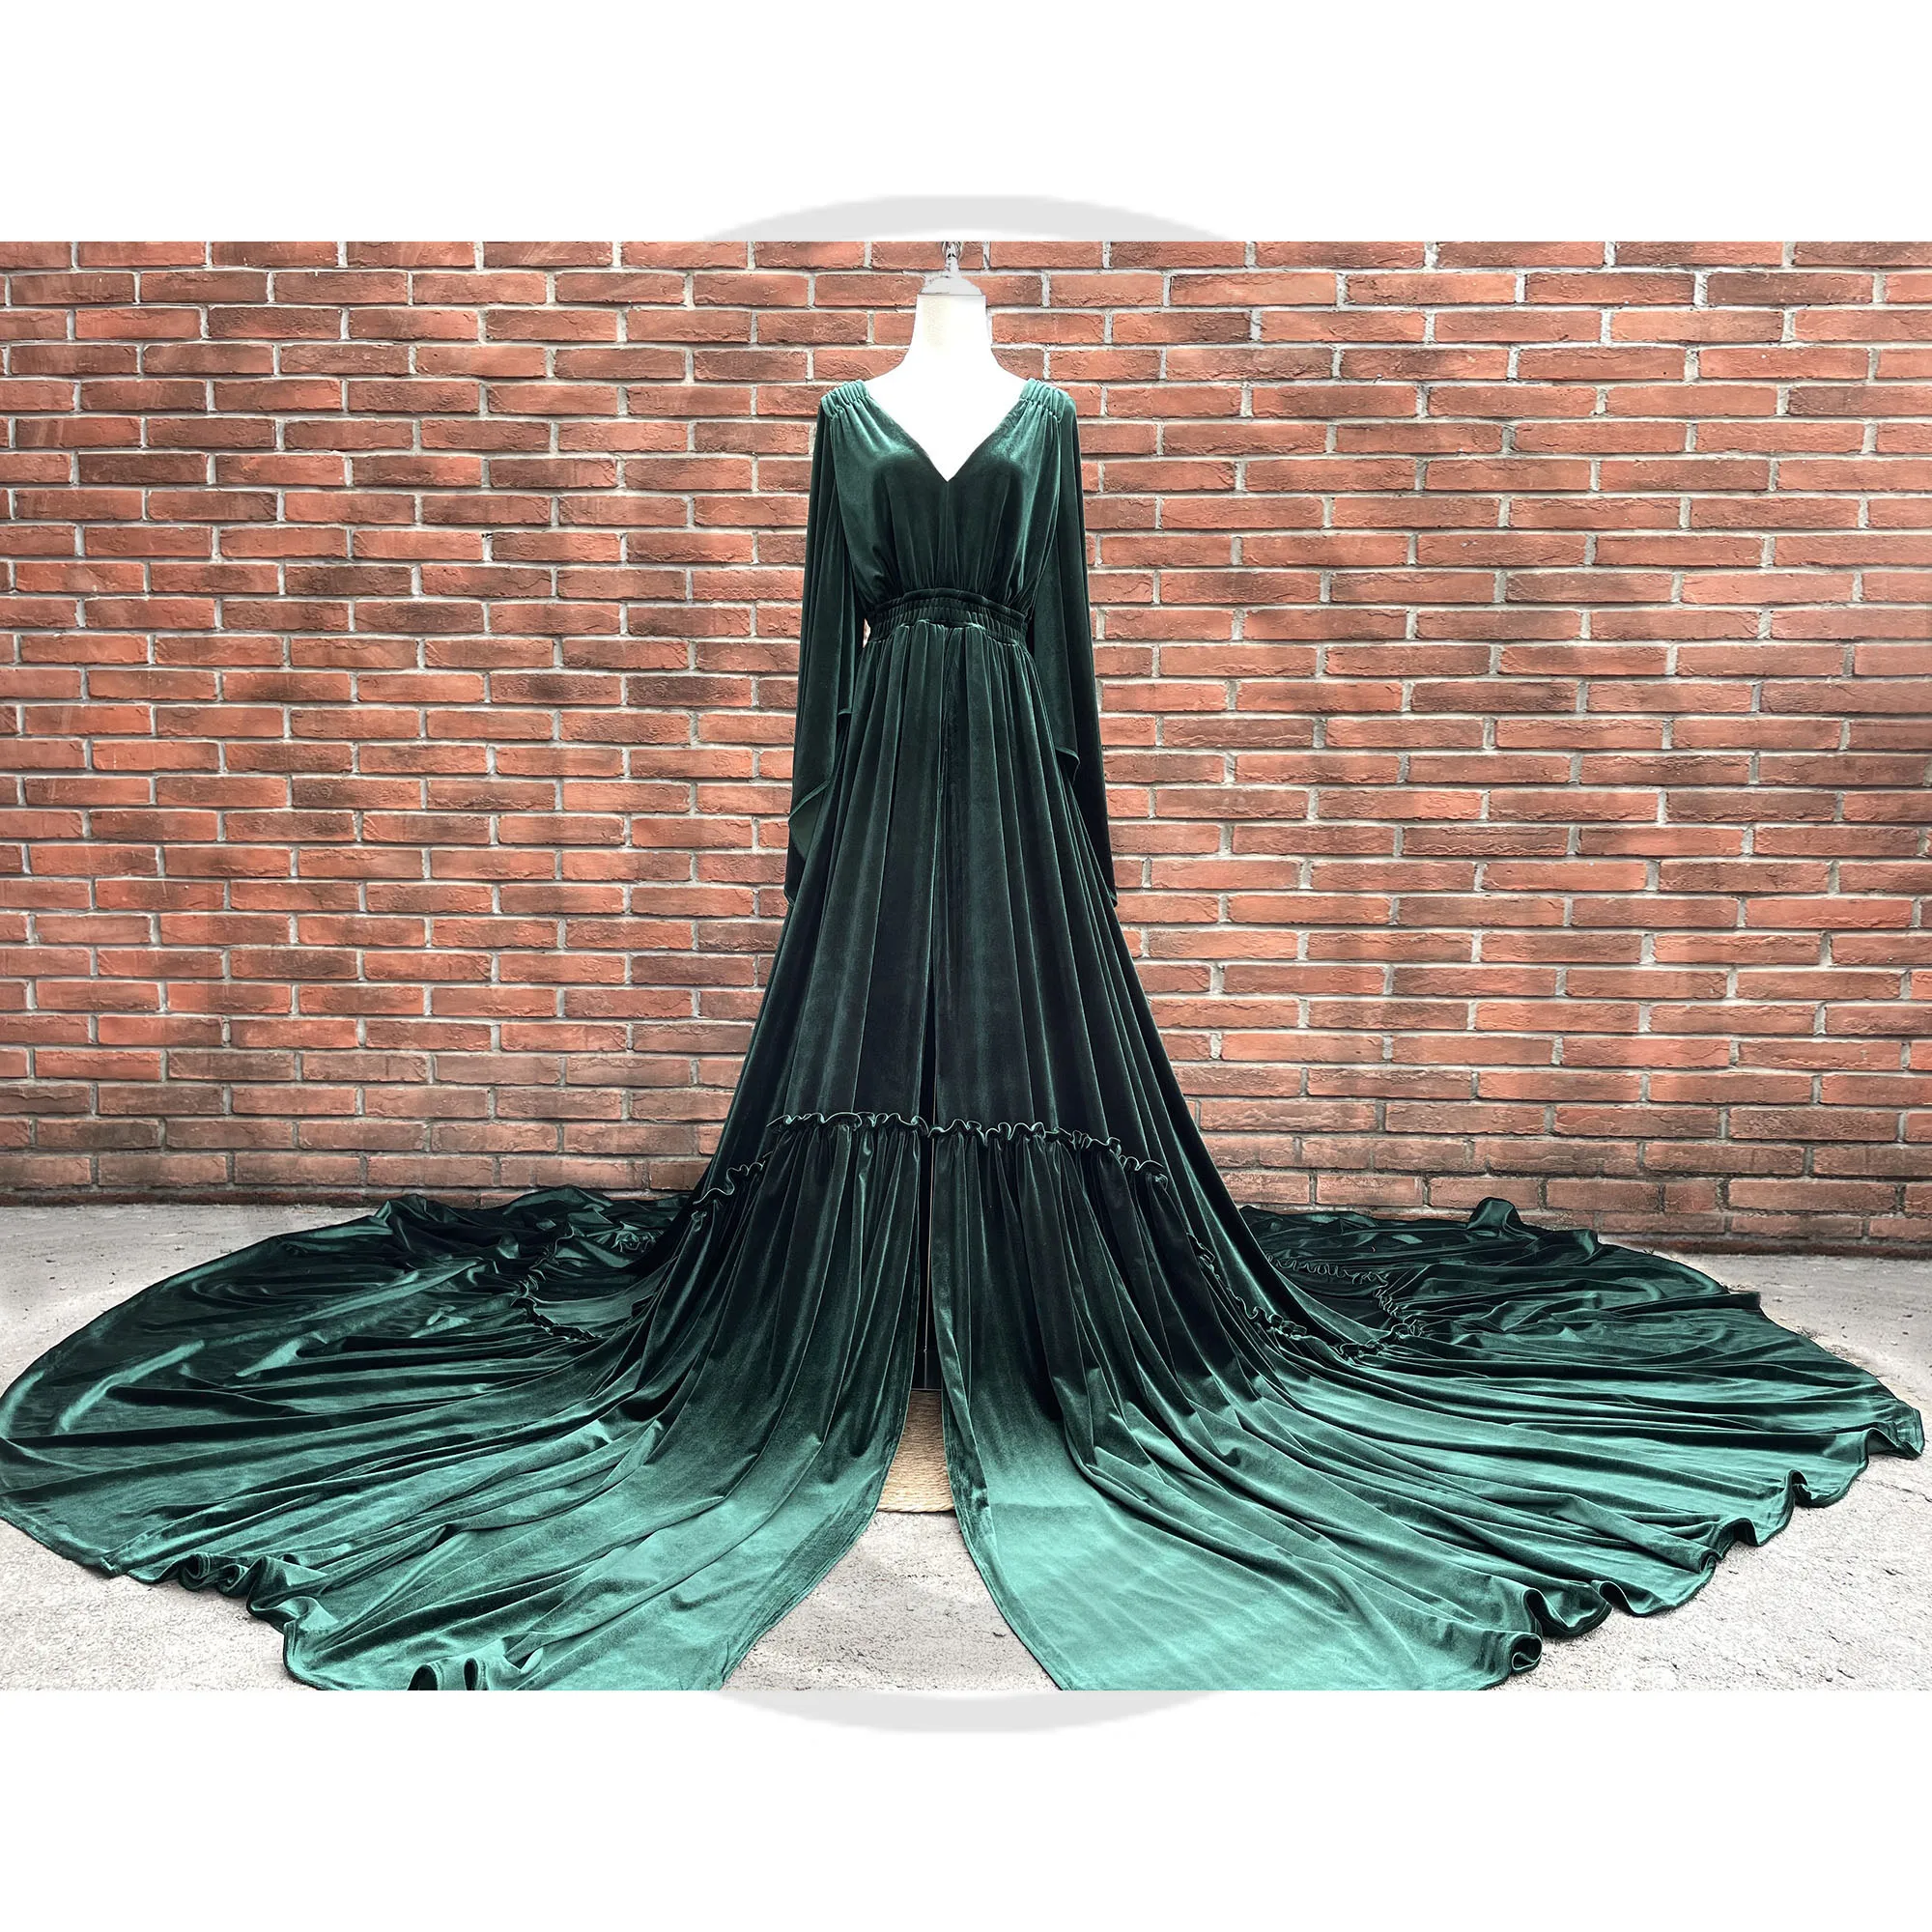 Christmas Photo Shoot Maternity Dress Pregnant Velvet Gown Evening Party Robe for Woman Photography Prop Baby Shower Costume enlarge